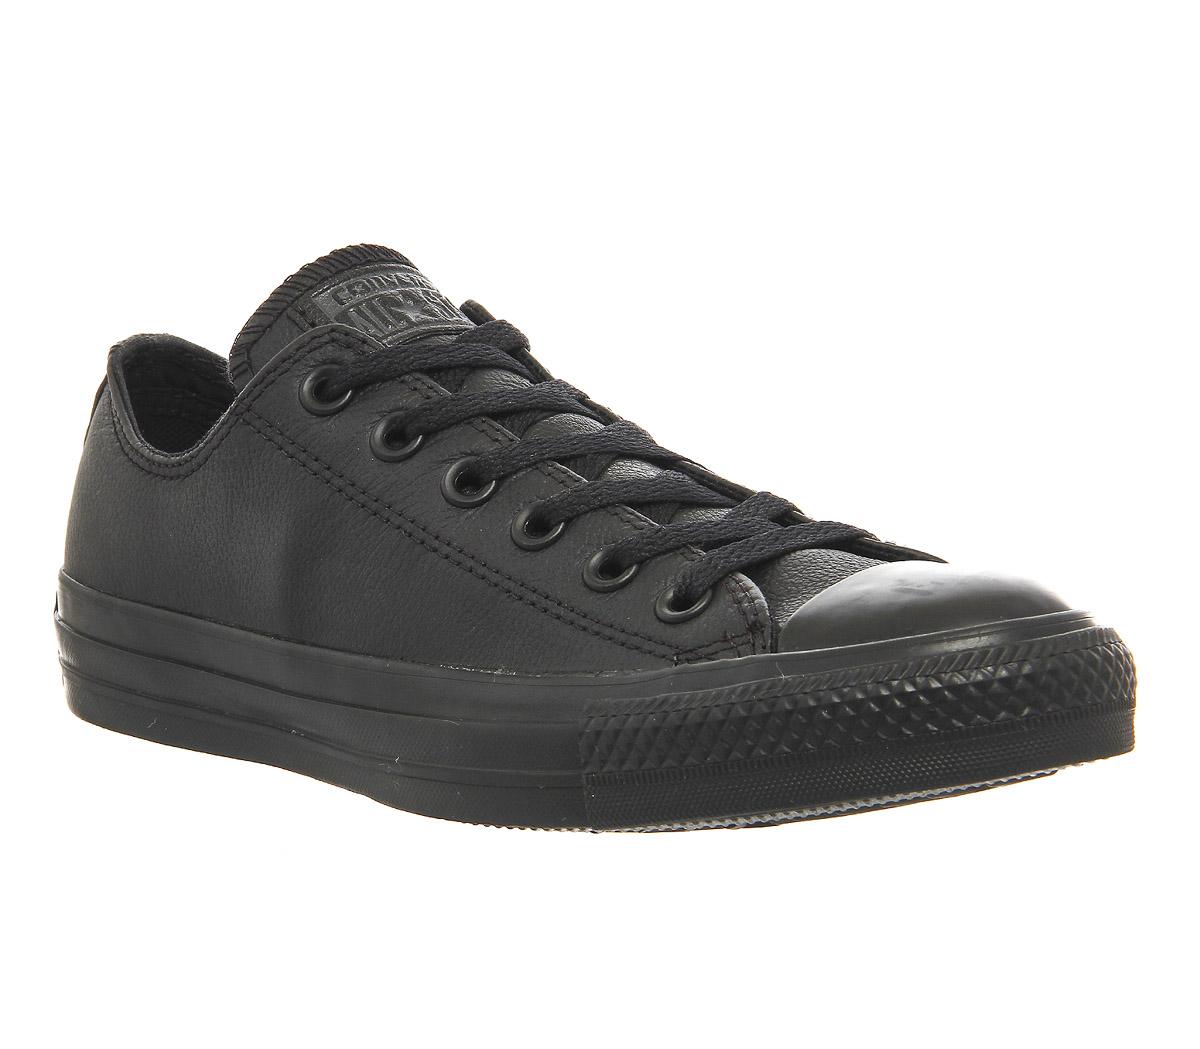 Smelte Sammenbrud George Eliot Converse All Star Low Leather in Black for Men - Lyst